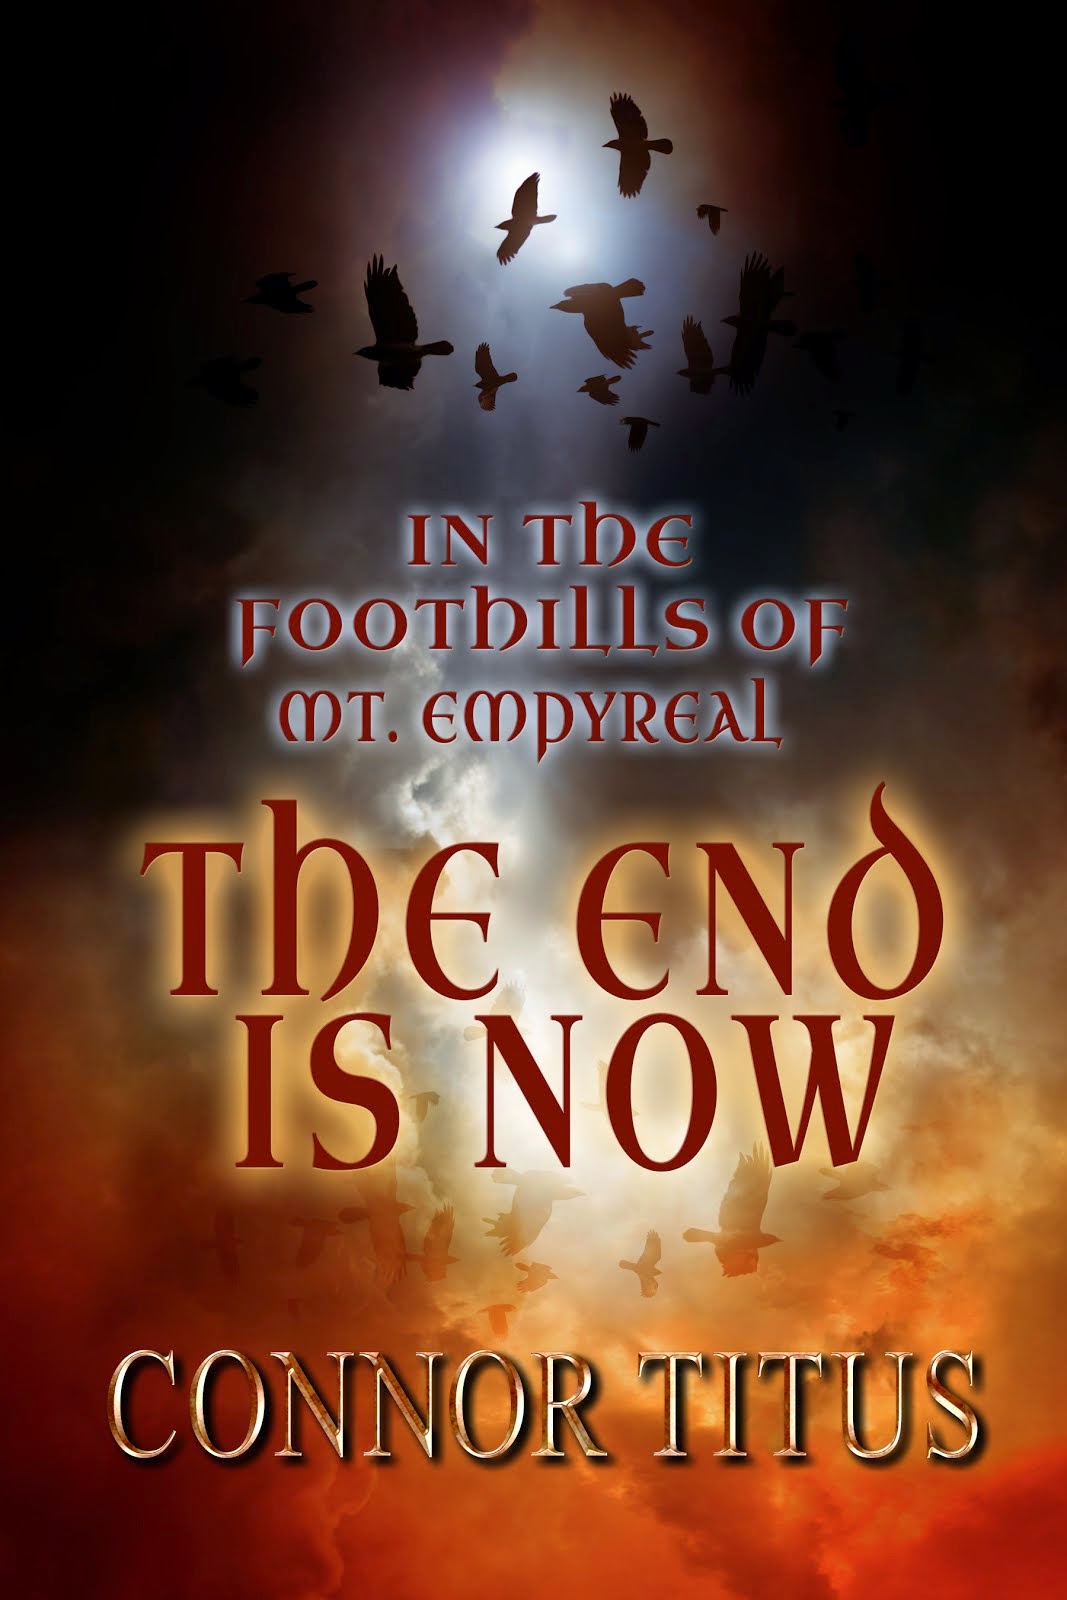 Click here to purchase: The End is Now!